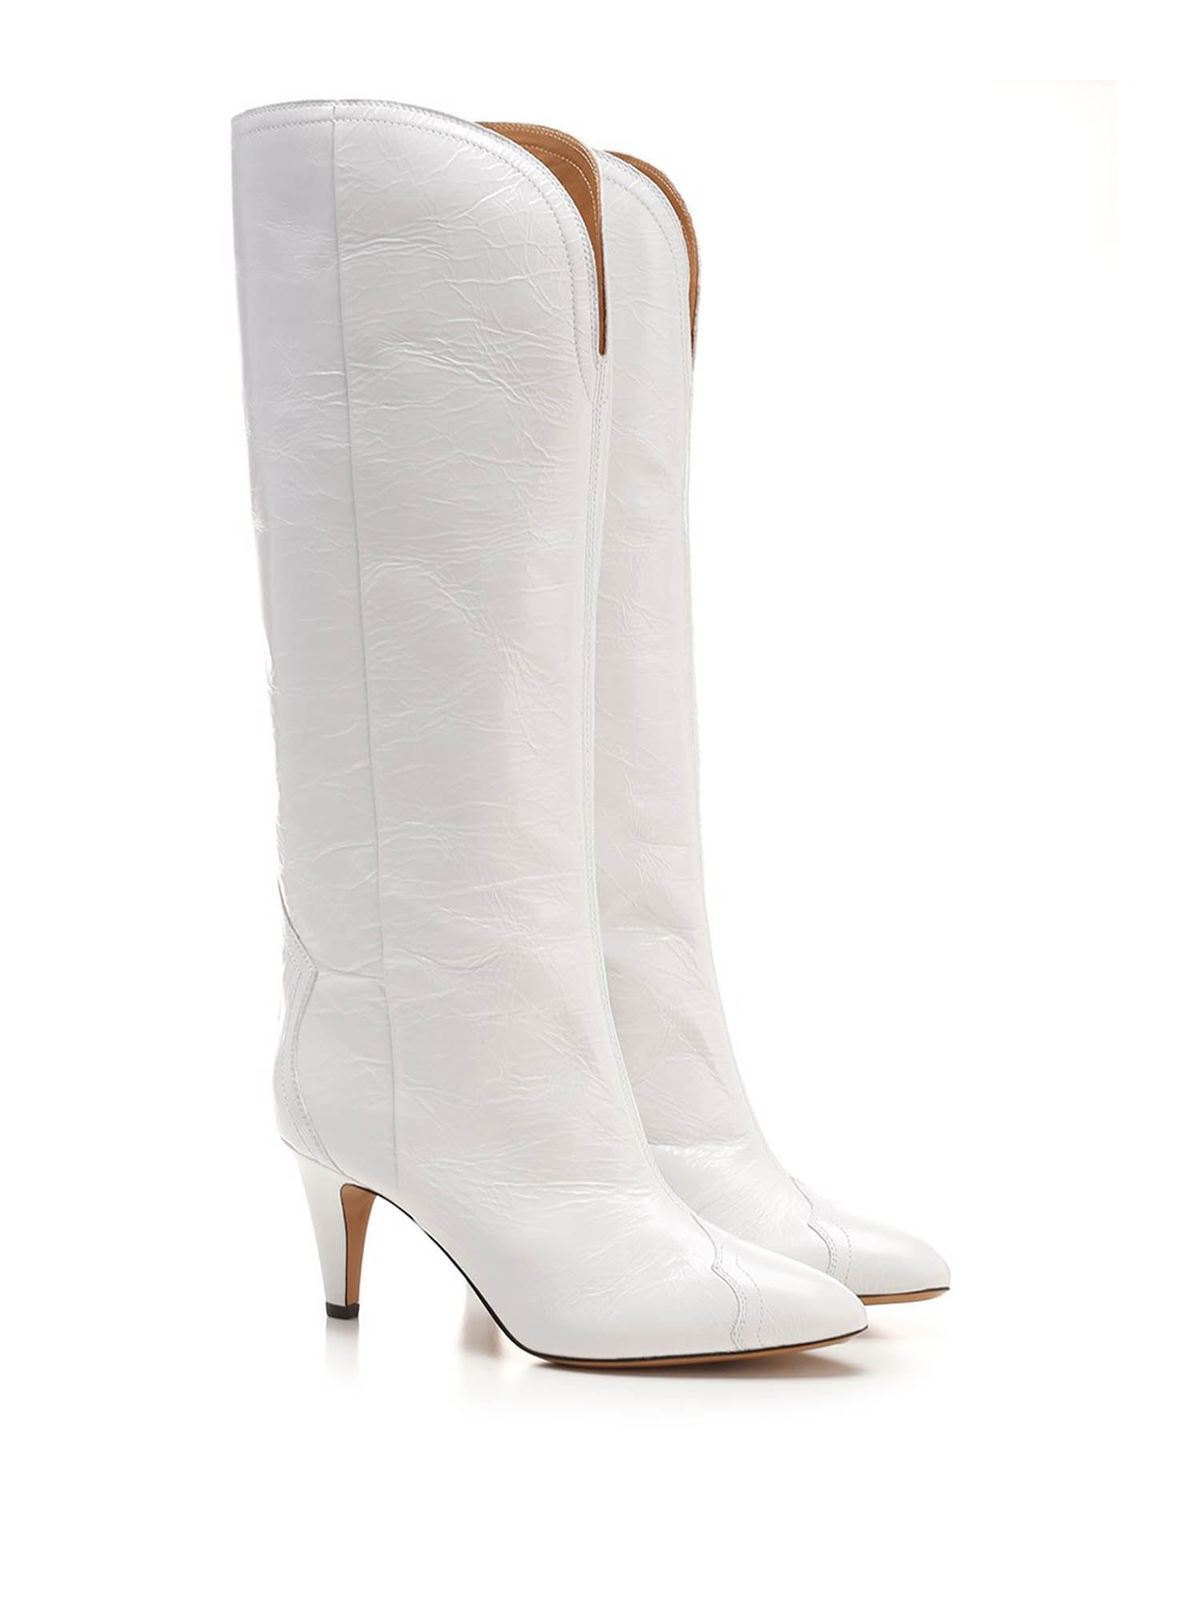 Wrak willekeurig salade Boots Isabel Marant - Lestany boots in white - BT020421A001S20WH